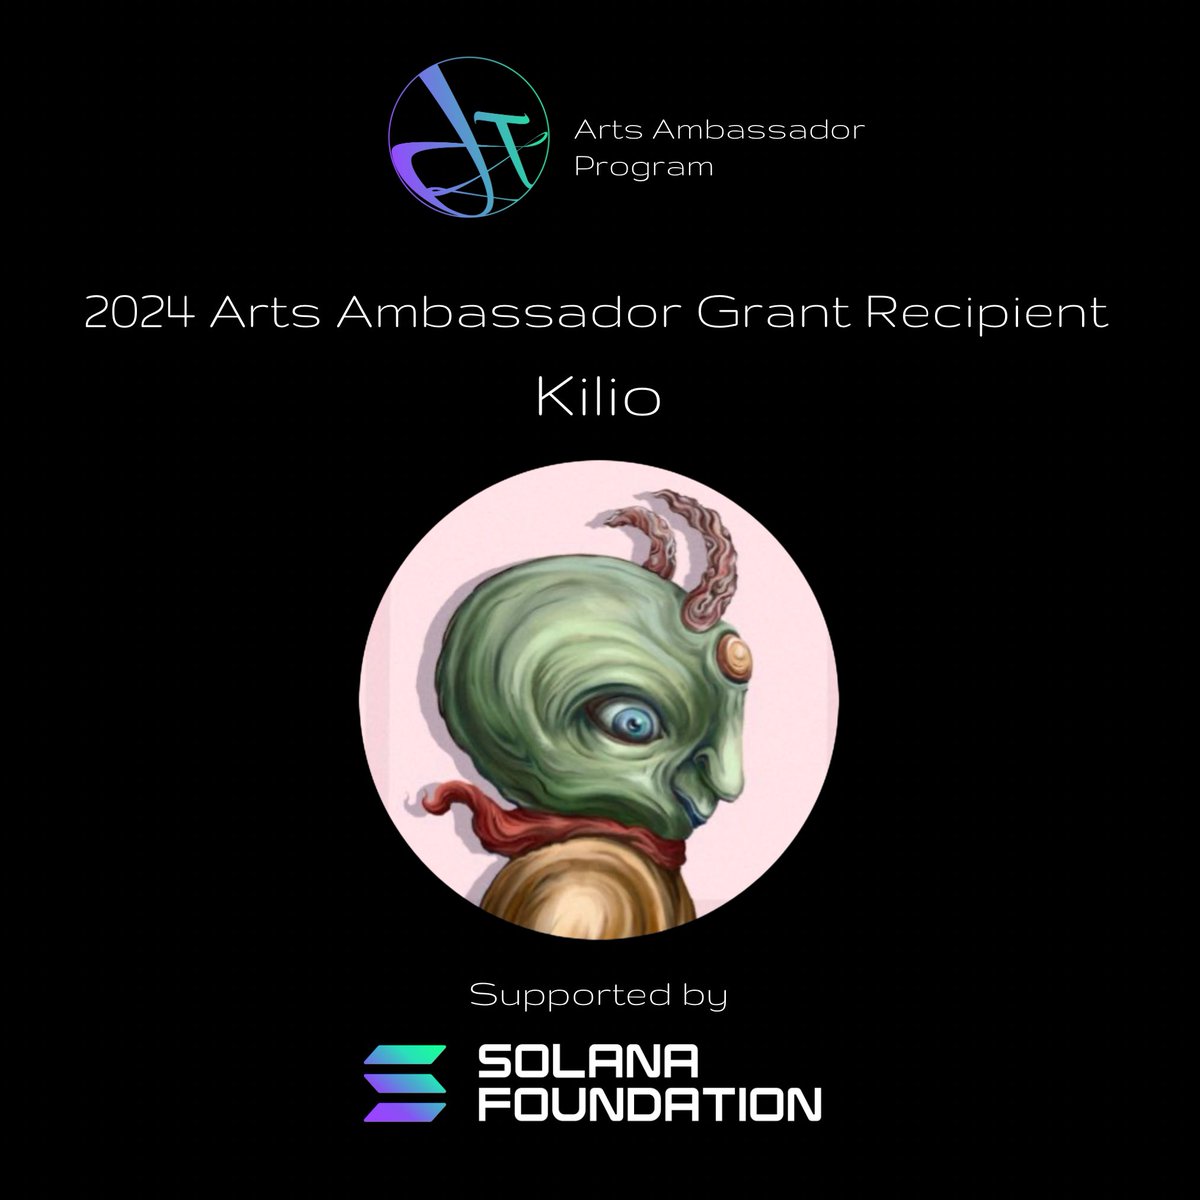 Happy to announce @kilio_art as a new Arts Ambassador Grant Recipient for Q2. Kilio will be touring and exhibiting at multiple art festivals throughout Germany in the name of Solana art. Excited for them to have this opportunity. Congratulations friend. The Arts Ambassador